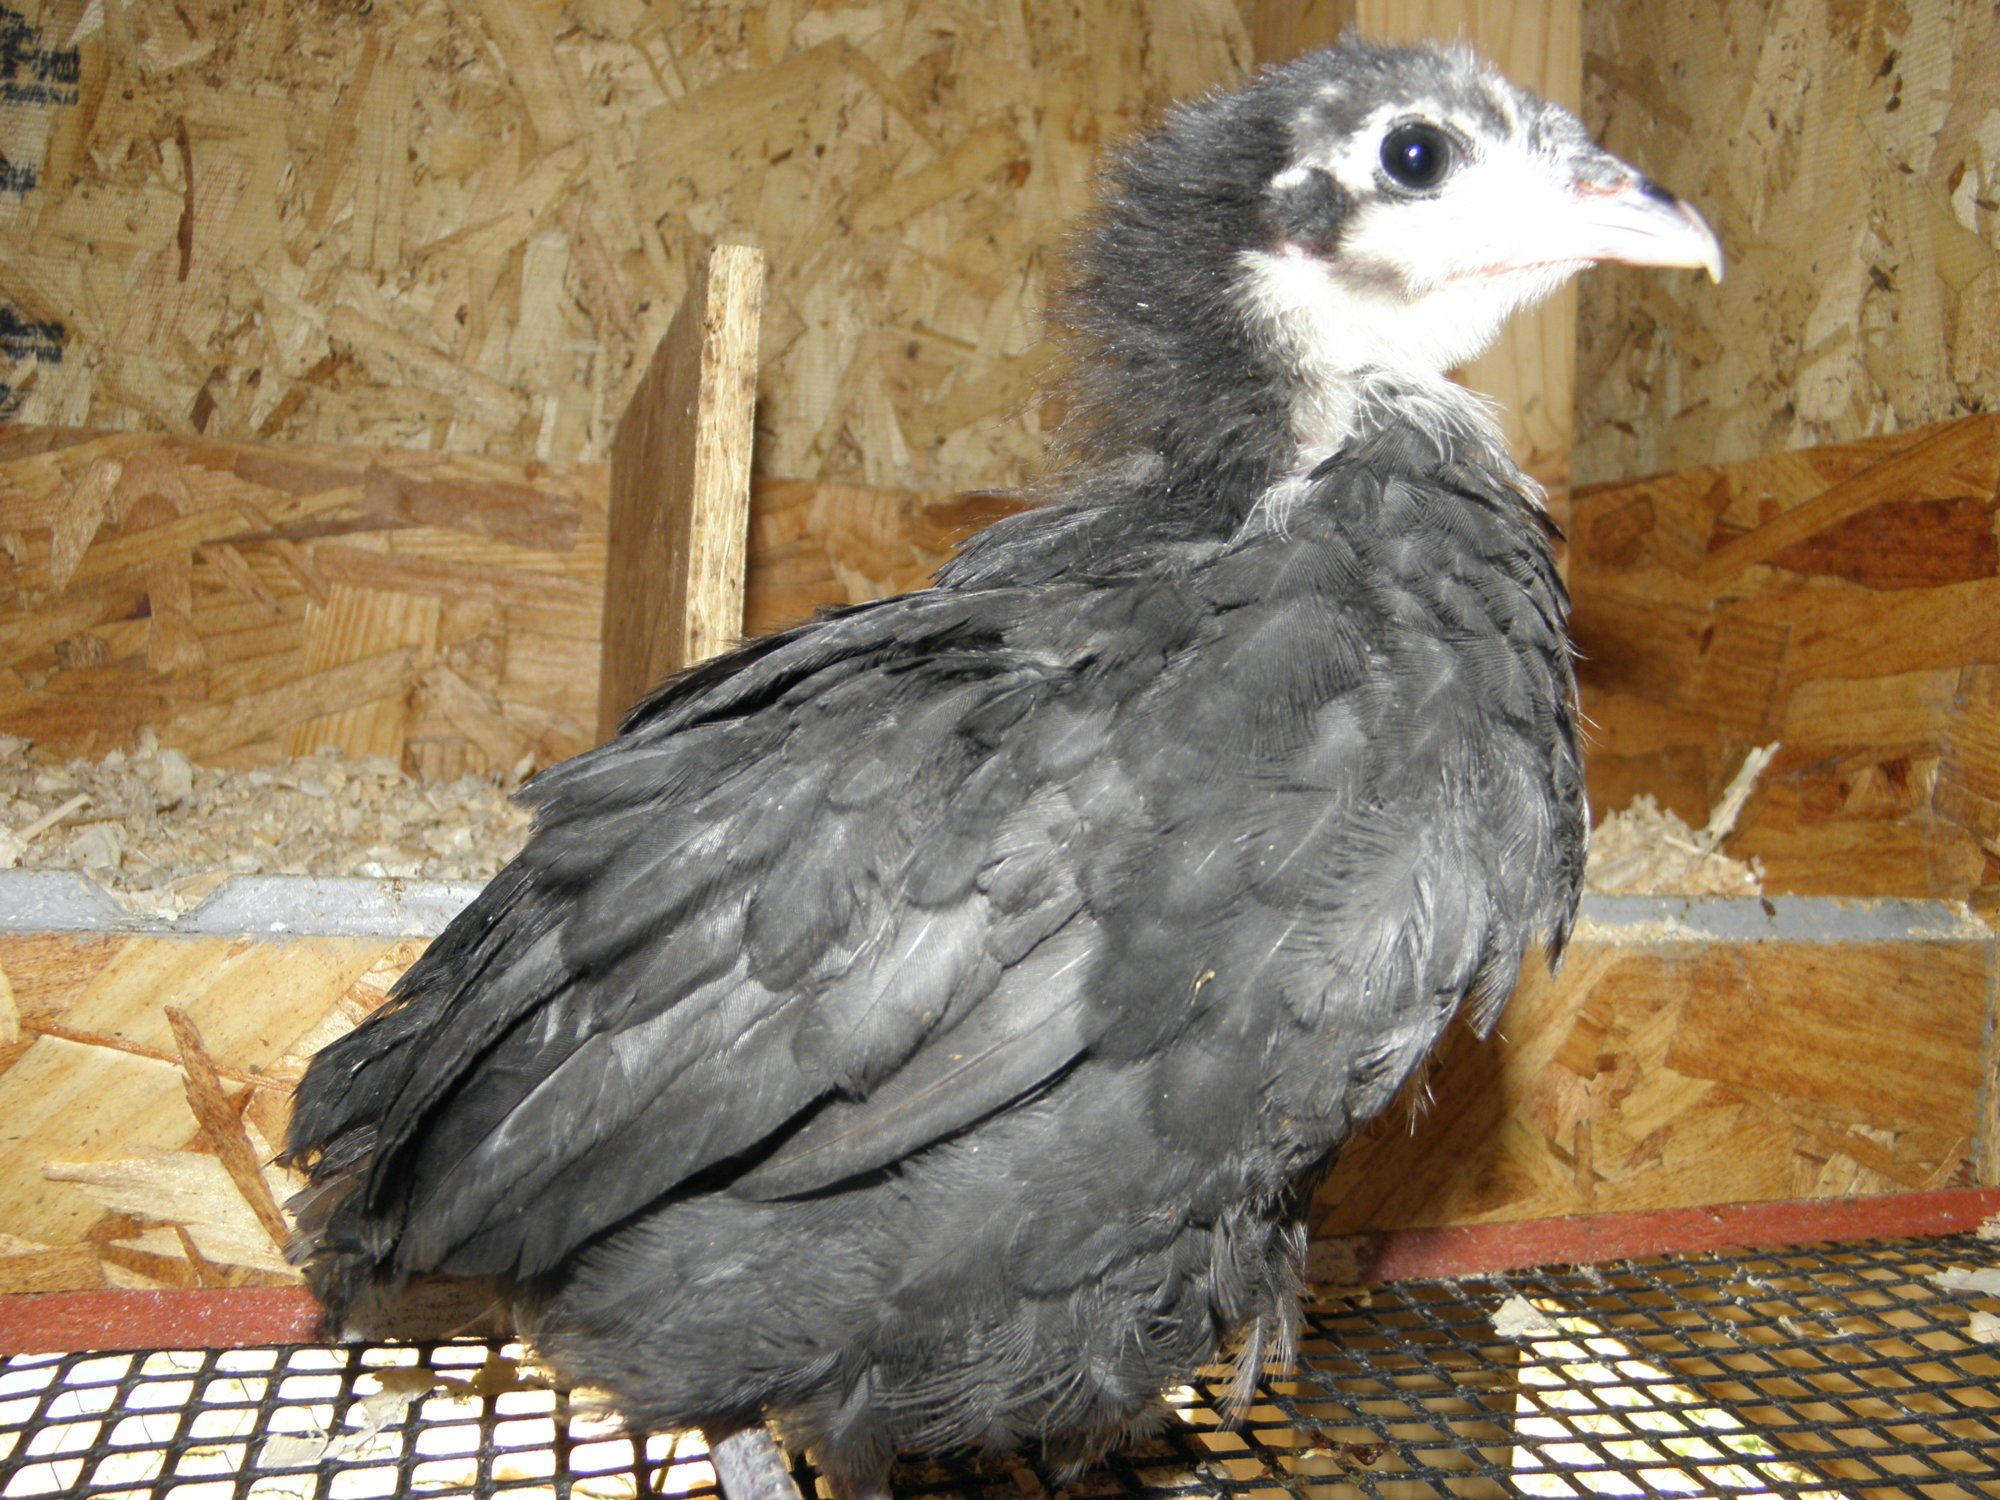 And here is little Shelia she is my Black Australorp hence the name for our Aussie friends.  She is a little sweetheart, likes to be held, is very quiet and gentle. Shelia was also born April 30, 2012